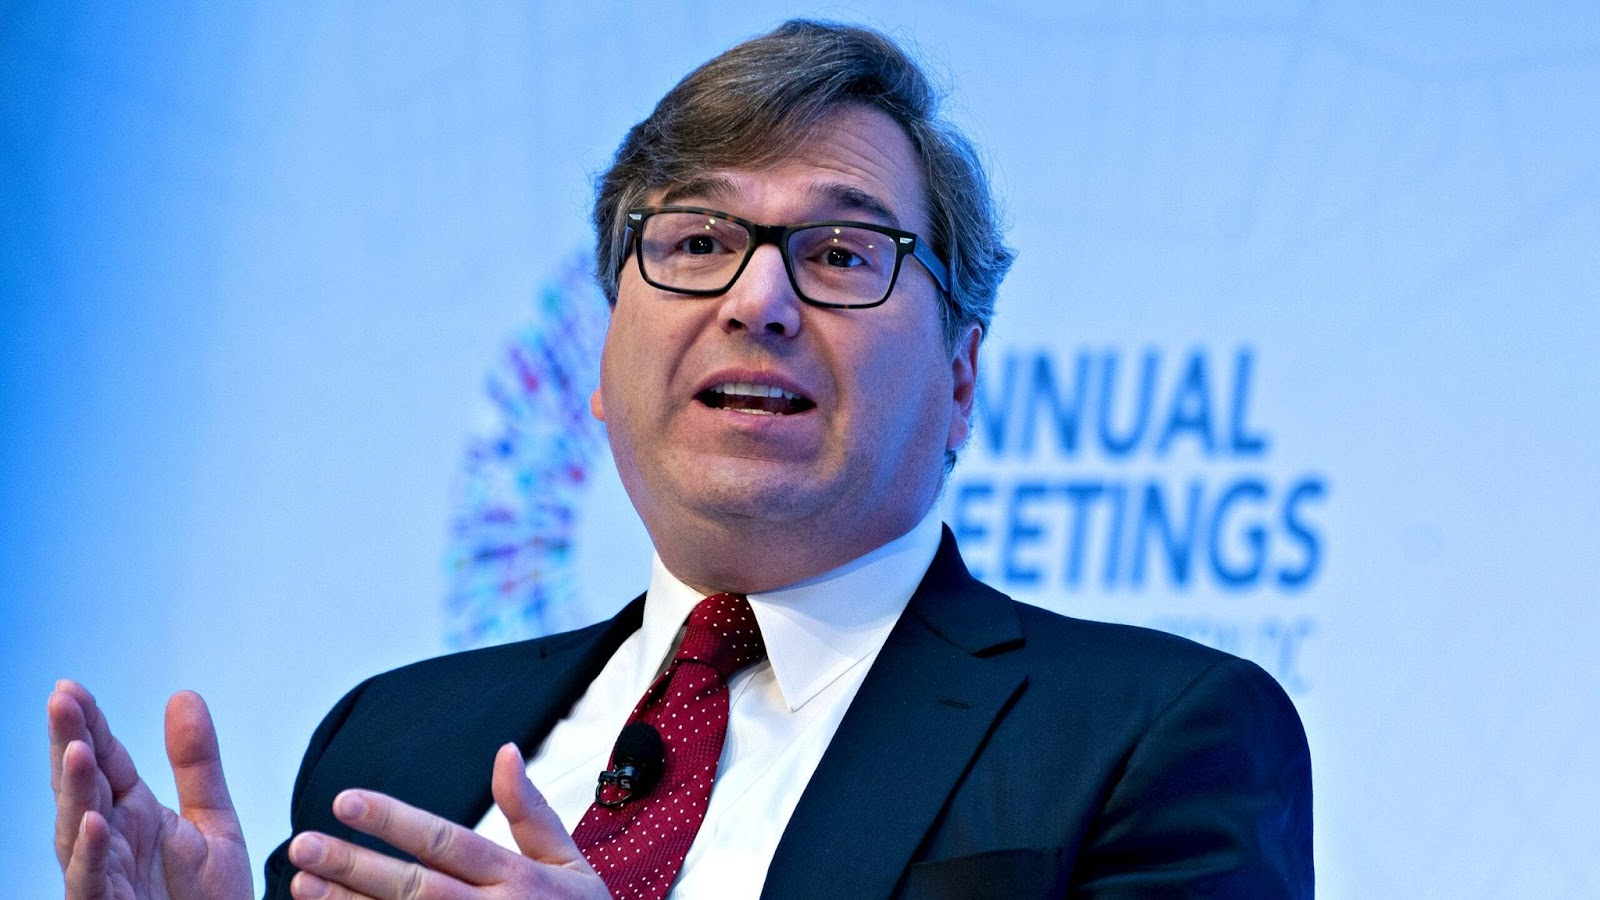 Jason Furman, professor at Harvard Kennedy School, speaks at a panel discussion during the annual meetings of the International Monetary Fund and World Bank Group in Washington, D.C., U.S., on Wednesday, Oct. 16, 2019. The IMF made a fifth-straight cut to its 2019 global growth forecast, citing a broad deceleration across the world's largest economies as trade tensions undermine the expansion.